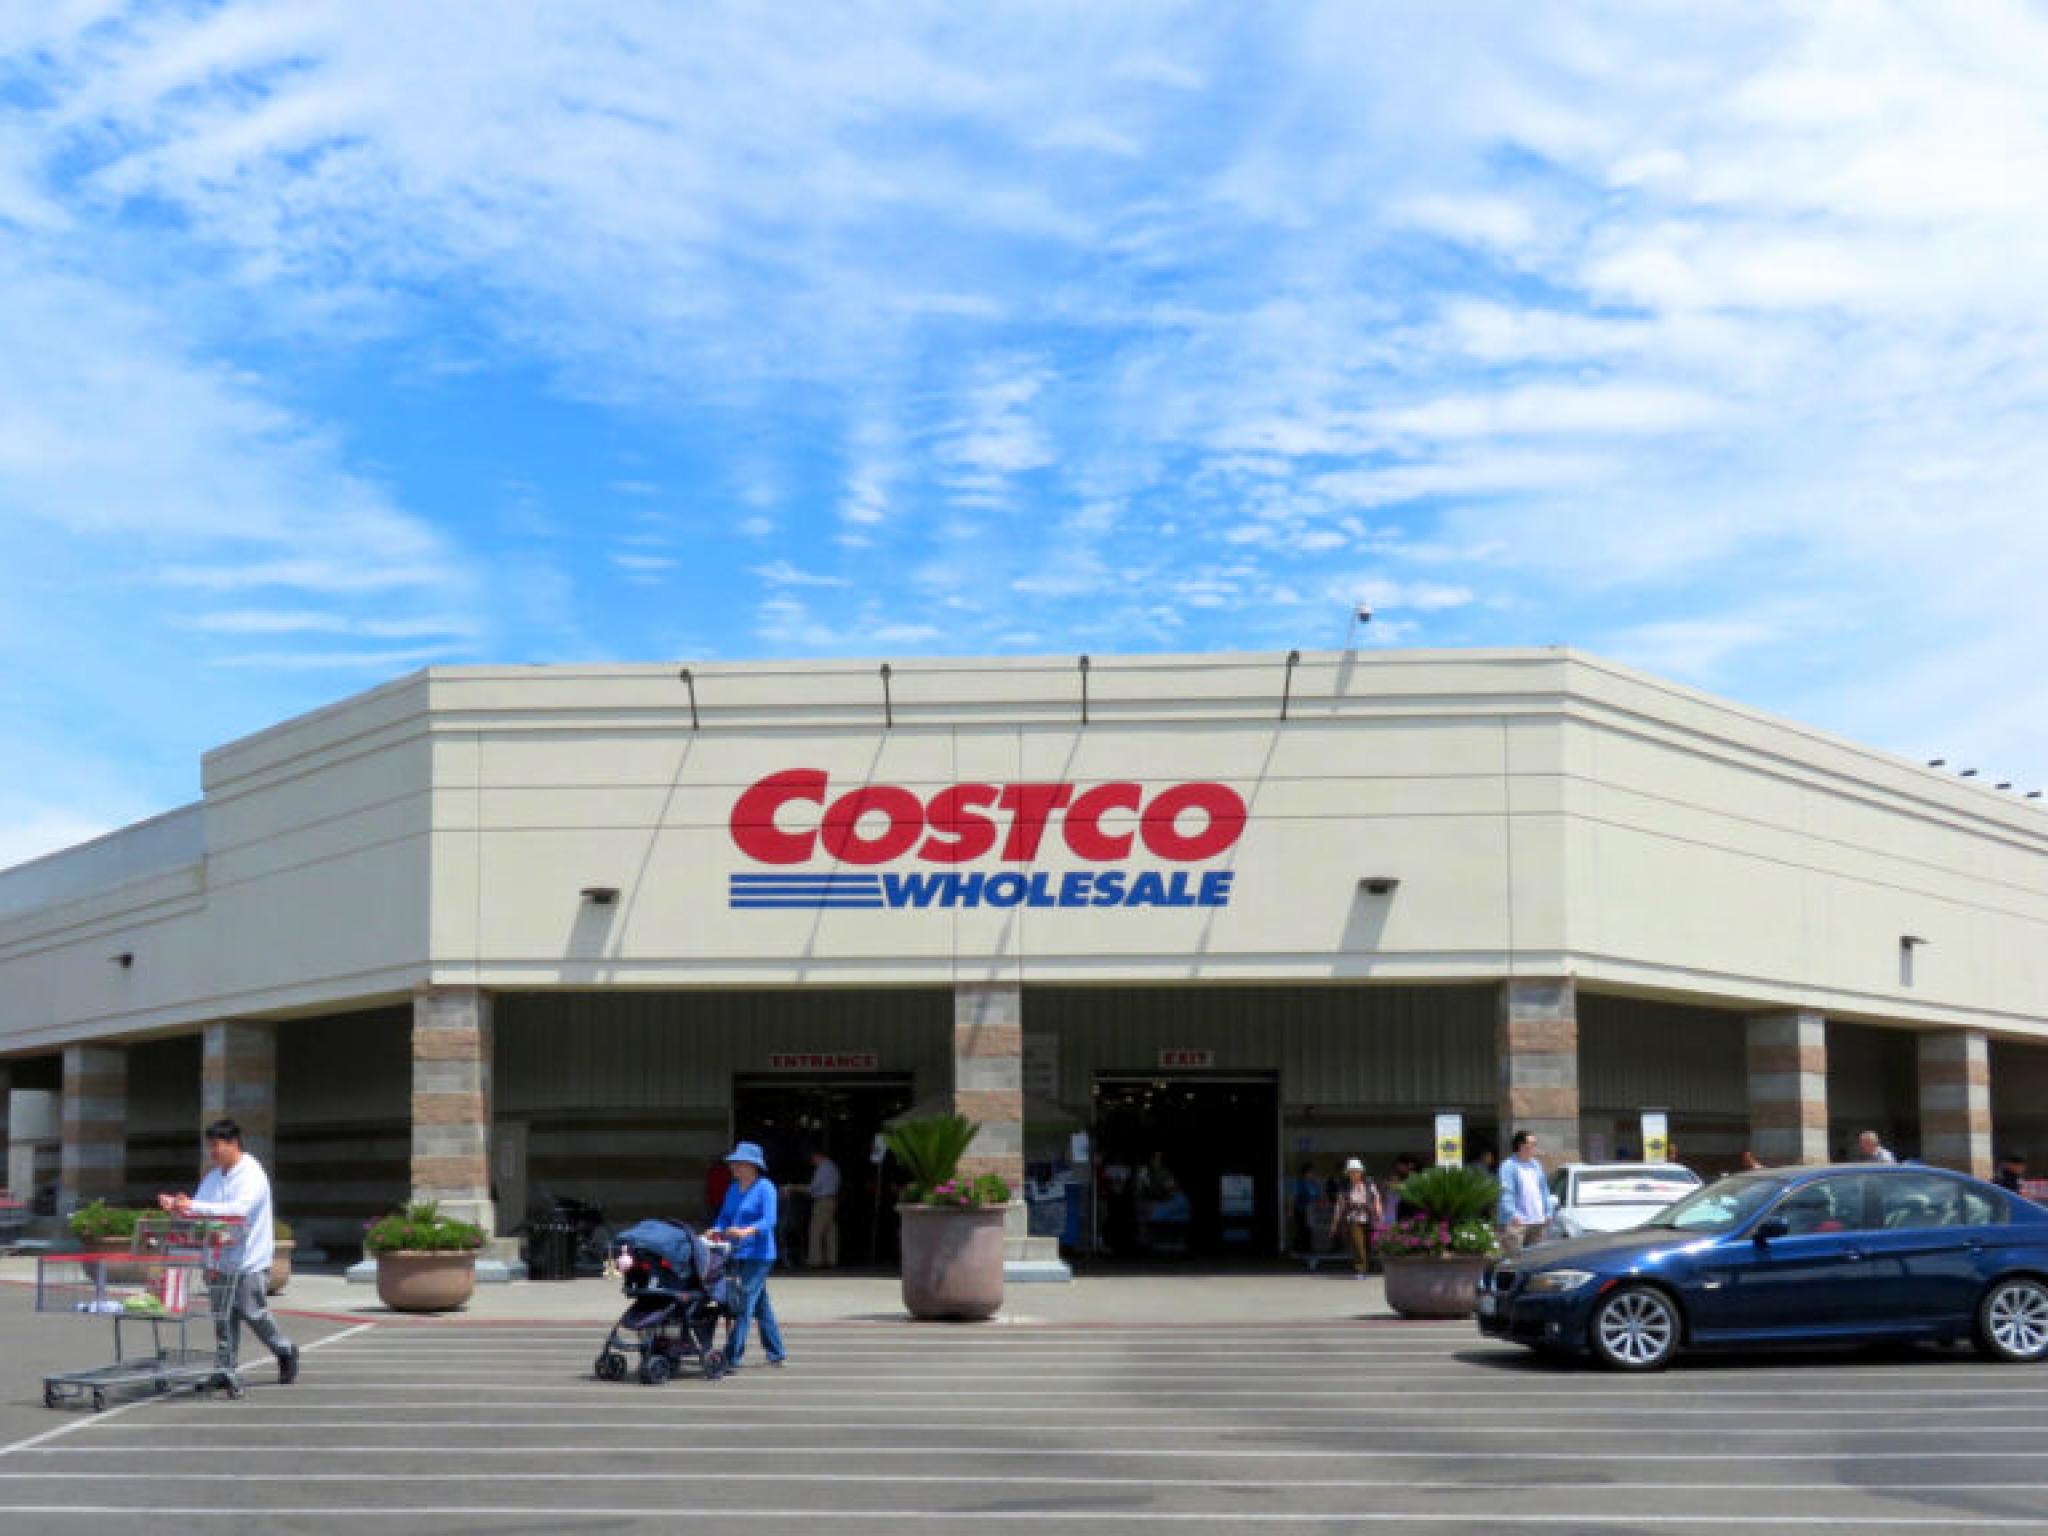  you-can-get-costco-discounts-up-to-2000-for-these-evs-taking-on-tesla 